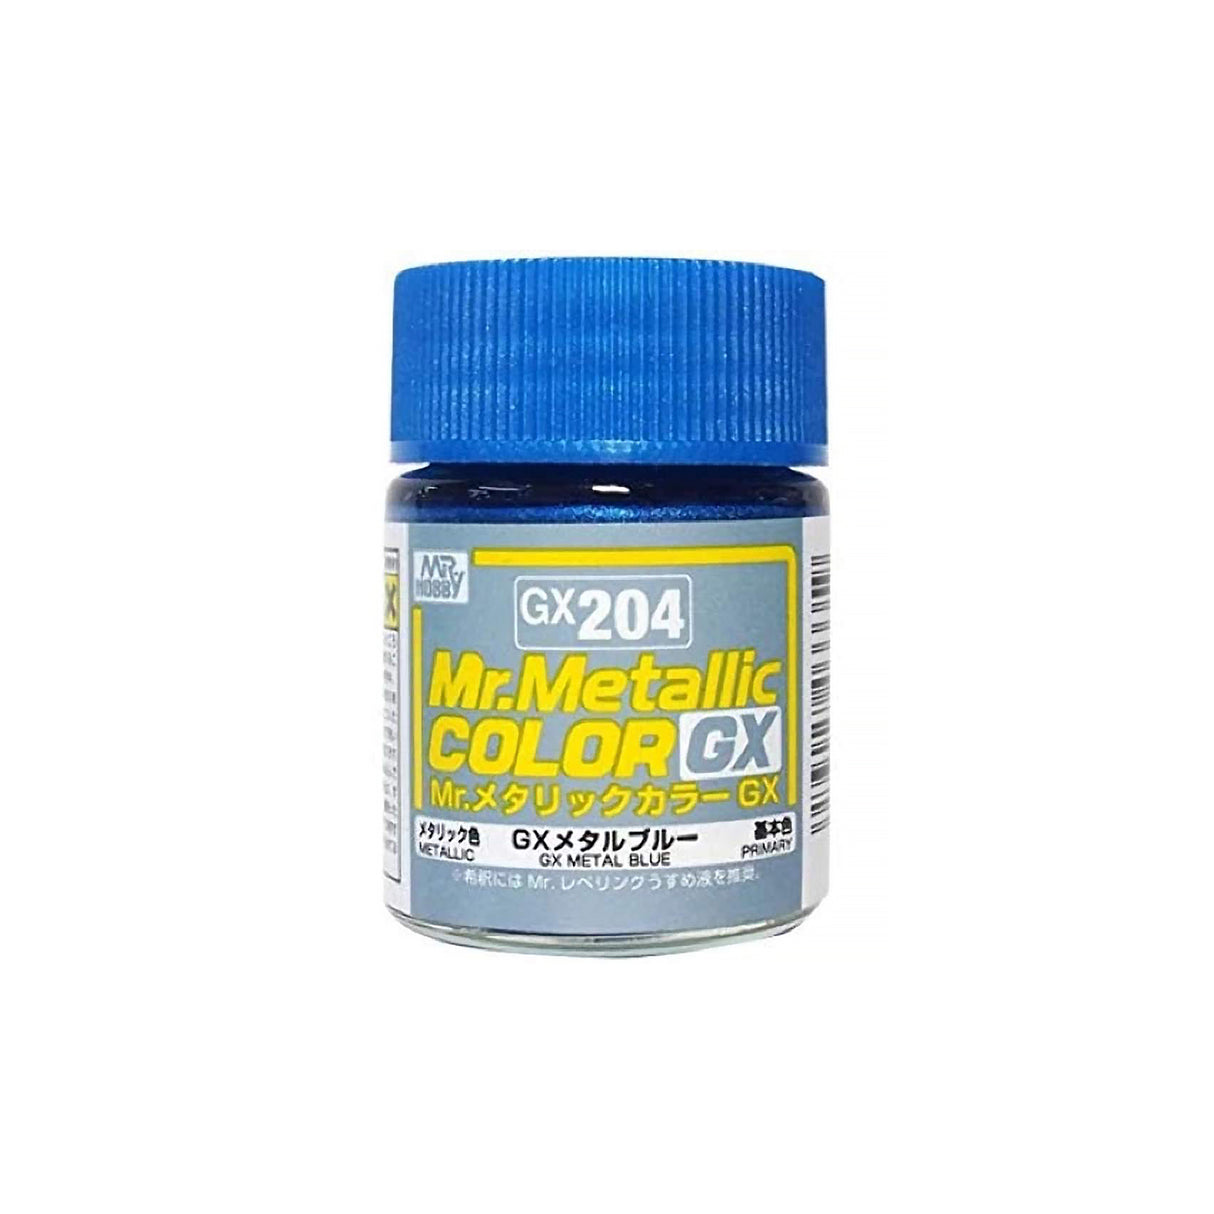 Mr Metallic Color Gx Blue Mr Hobby PAINT, BRUSHES & SUPPLIES